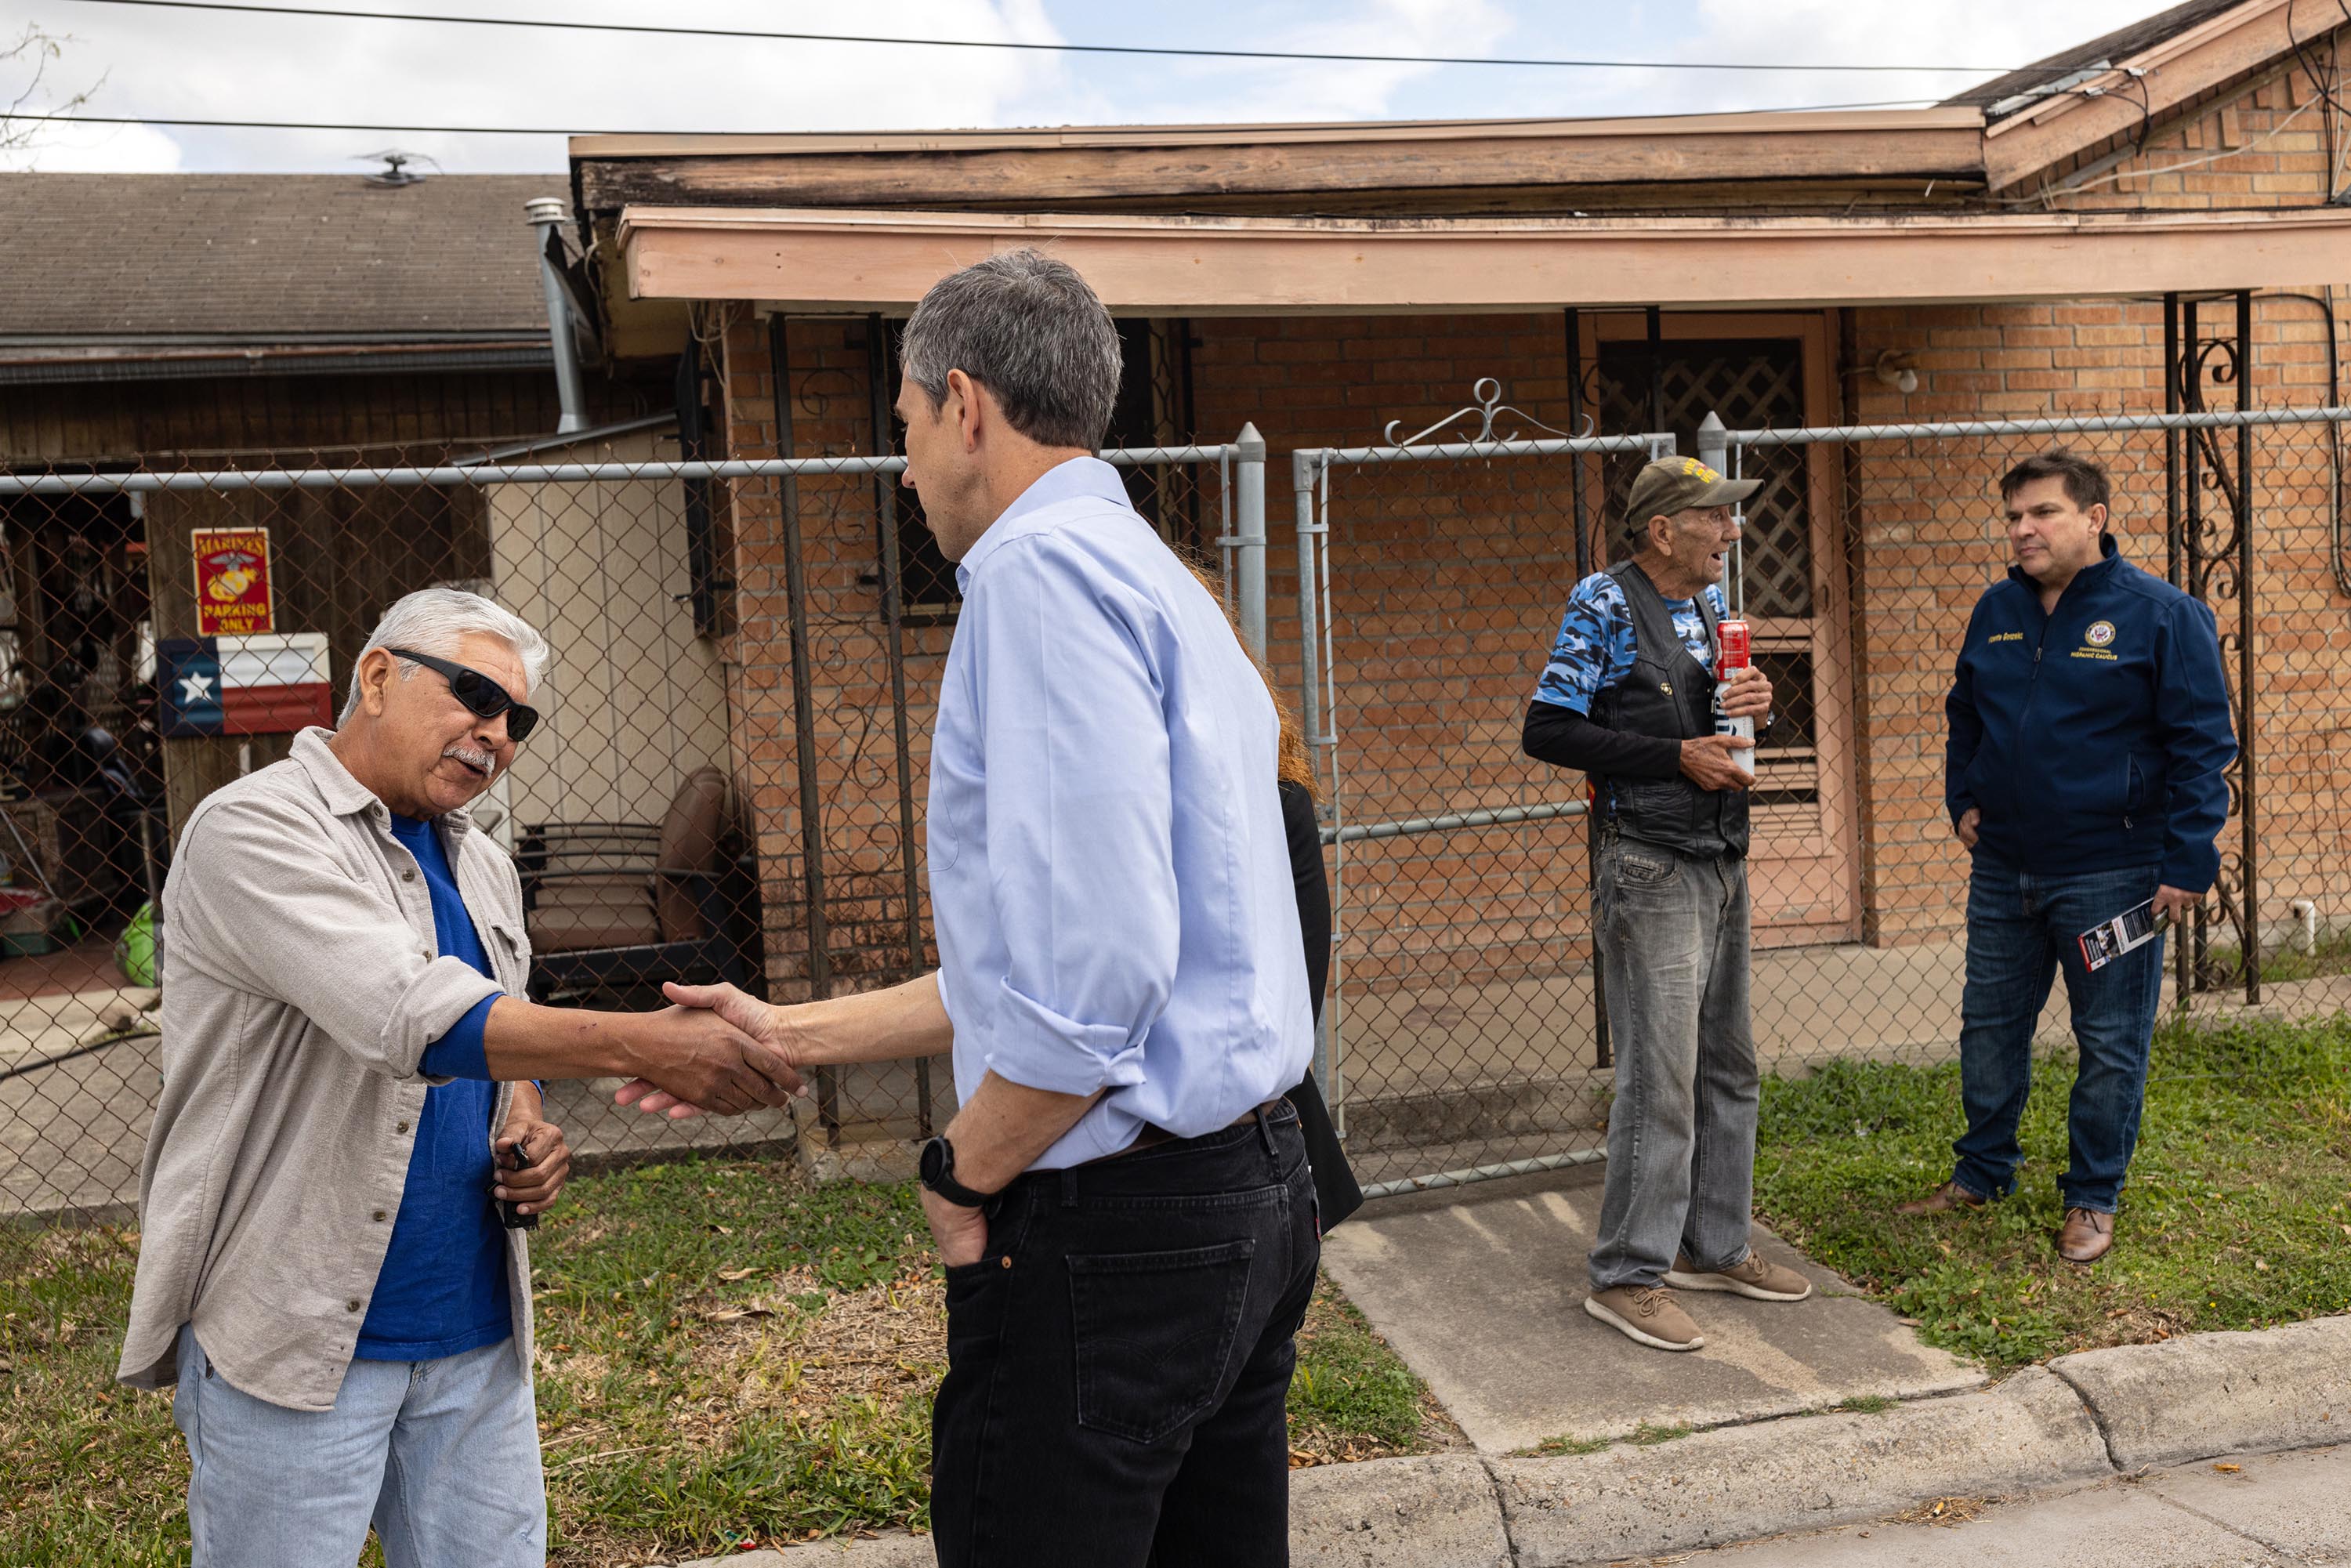 Beto O’Rourke, Texas Democratic gubernatorial candidate, and Congressman Vicente Gonzalez, who represents Texas’ 15th Congressional District and is a candidate for the redrawn 34th Congressional District, speak with (left to right) Robert Lopez and James Roussett while canvassing a neighborhood in Brownsville, Texas.